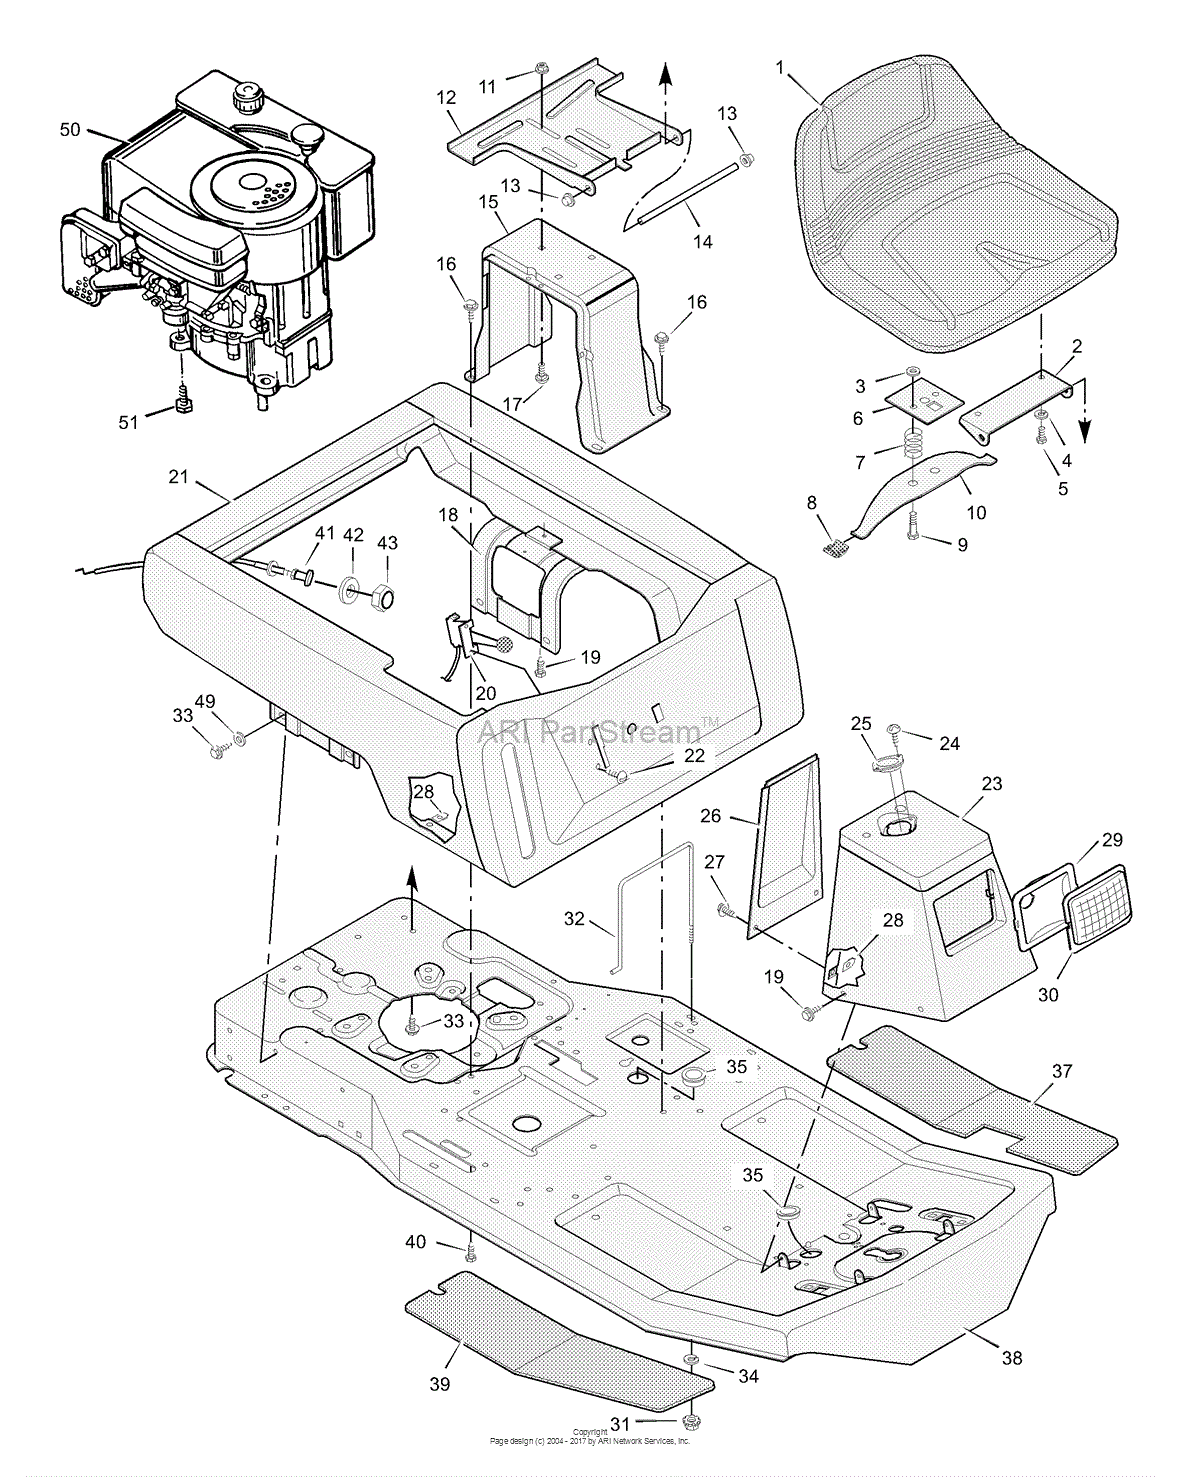 Murray 30505x92A - Rear Engine Riders (2000) Parts Diagrams